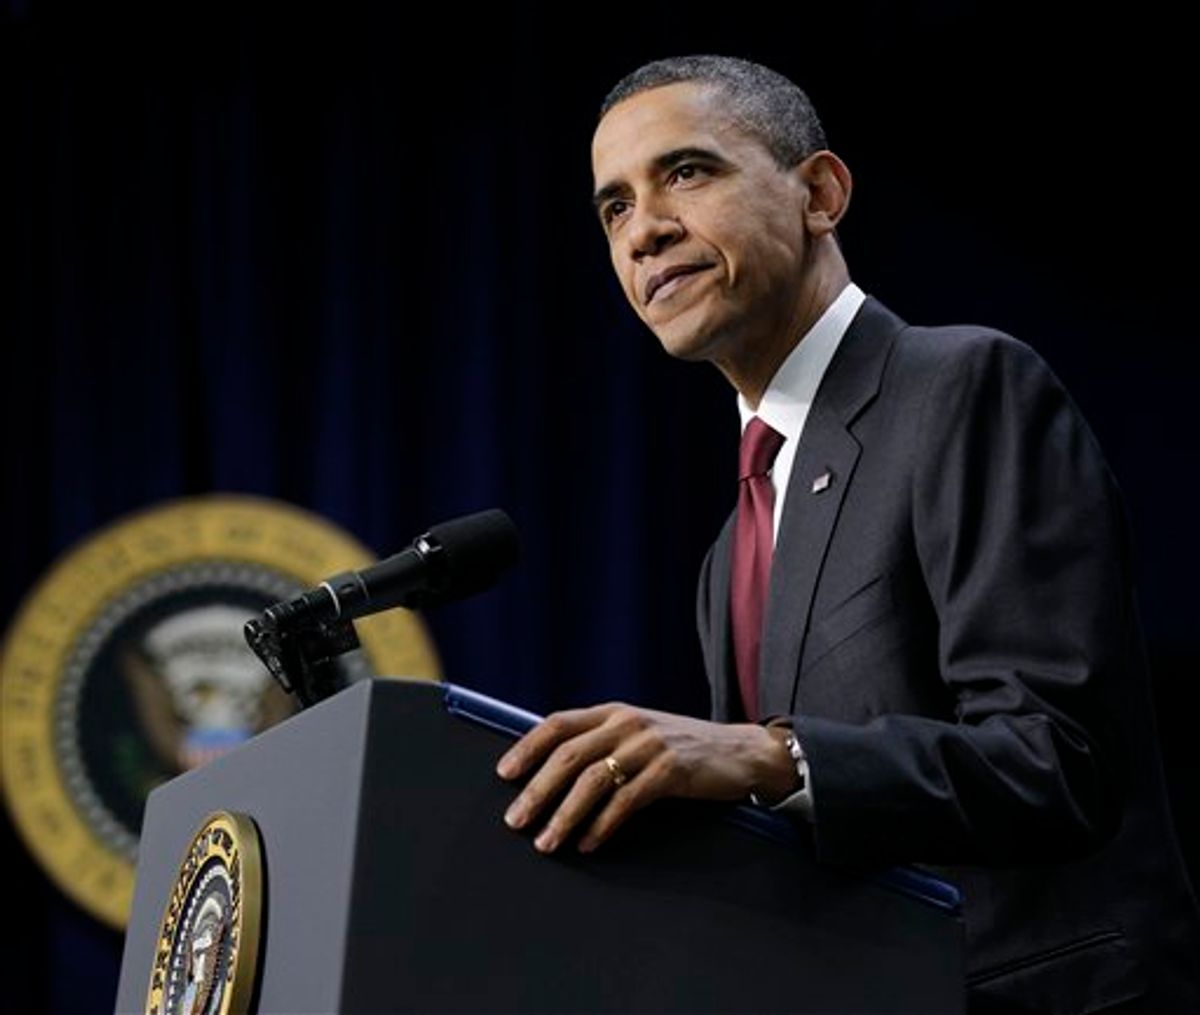 President Barack Obama speaks before signing the $858 billion tax deal into law in a ceremony in the Eisenhower Executive Office Building on the White House complex, Friday, Dec. 17, 2010 in Washington. (AP Photo/Pablo Martinez Monsivais) (AP)